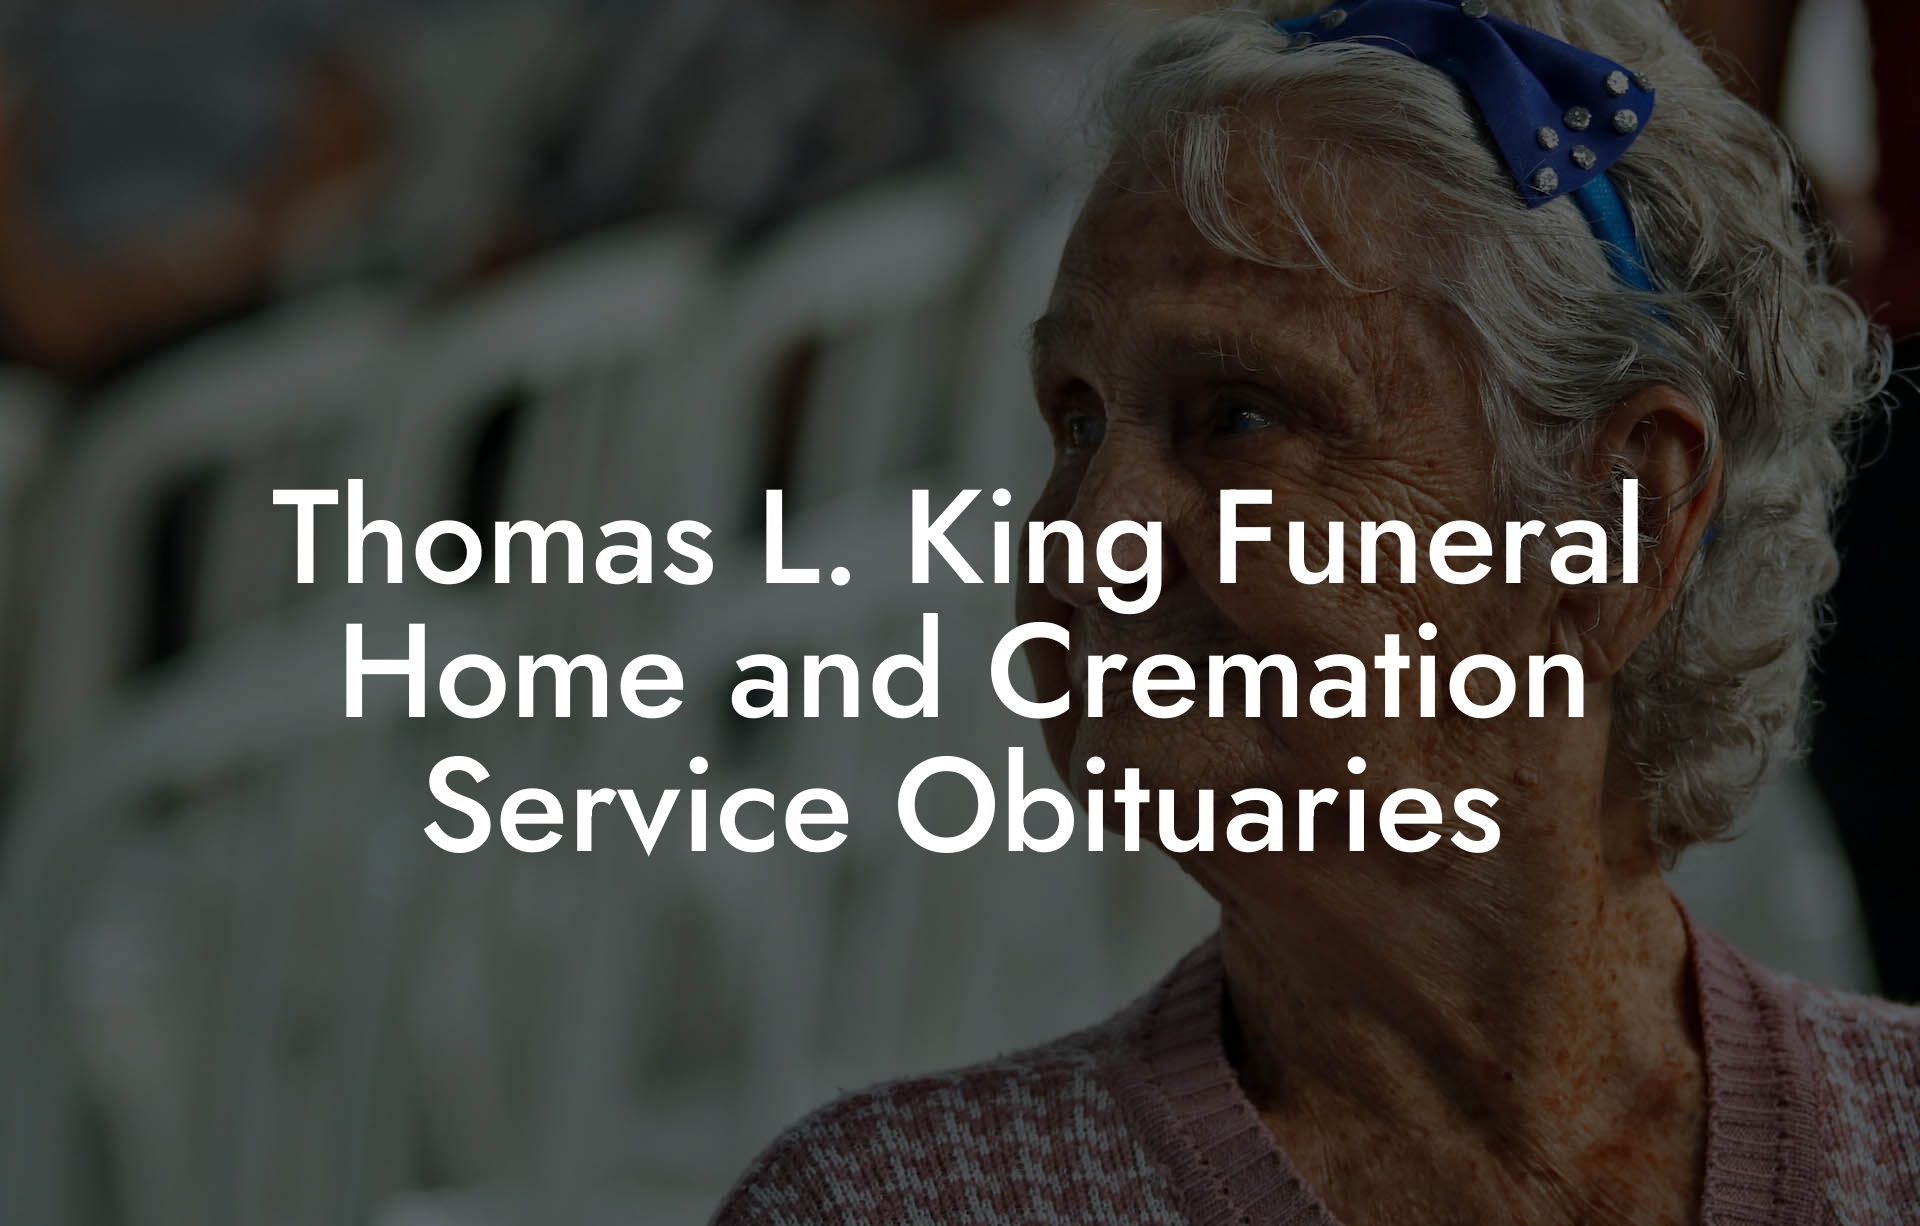 Thomas L. King Funeral Home and Cremation Service Obituaries